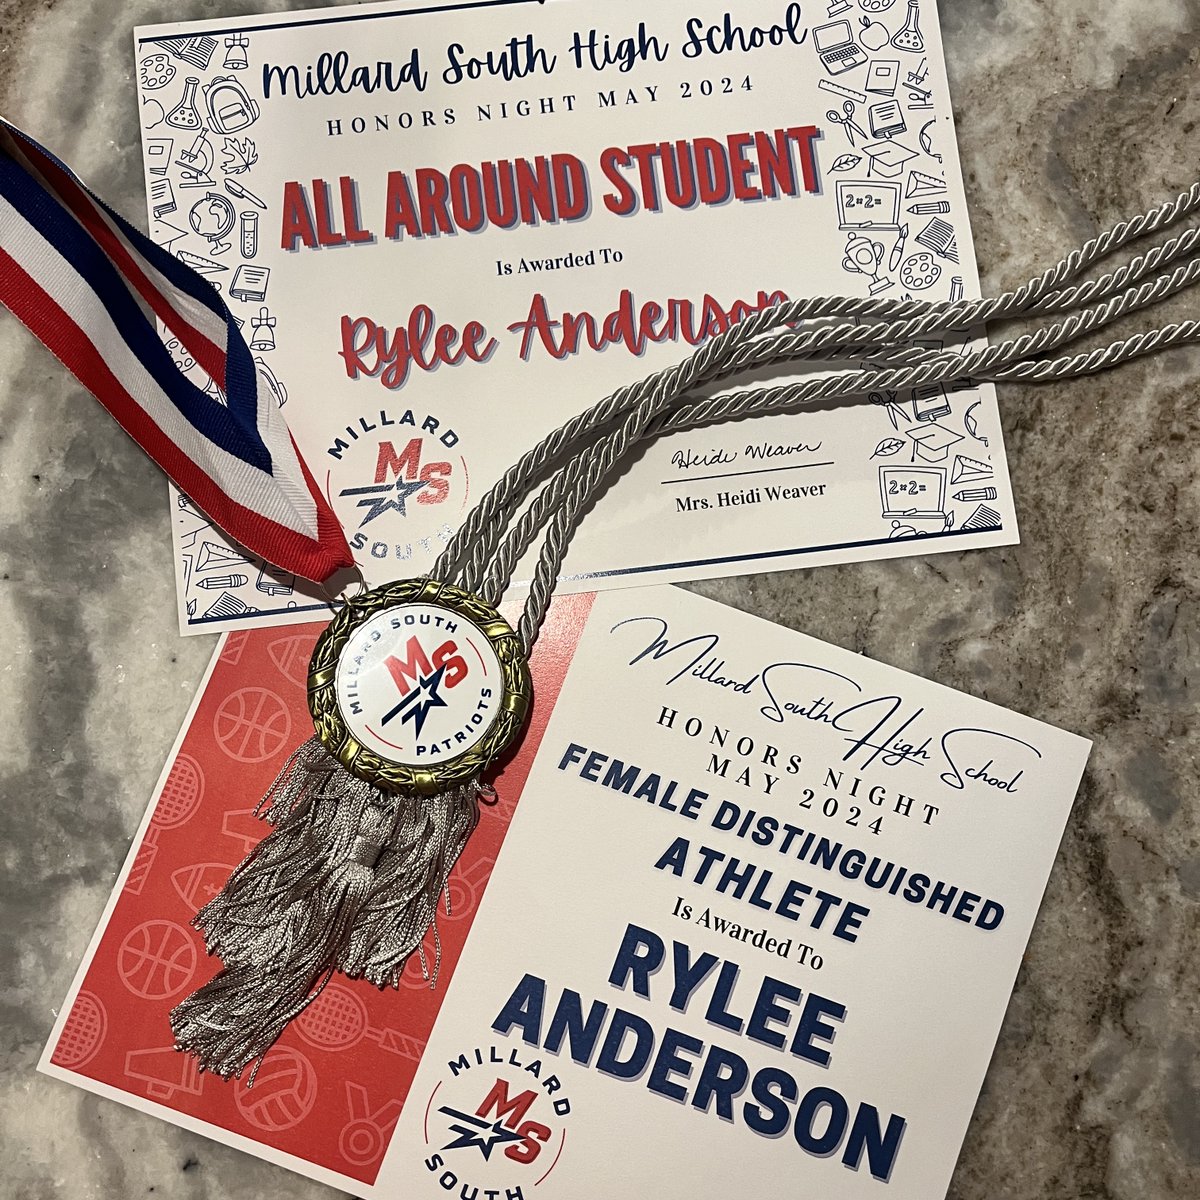 Beyond grateful for the recognition at Millard South Senior Academics Night. THANK you to the teachers & coaches who nominated and voted for All Around Student and Female Distinguished Athlete! #PatriotPride #TPW @VolleyPats @mshsbowling @MSHSDeca @MSHSactivities @MSouthUnified